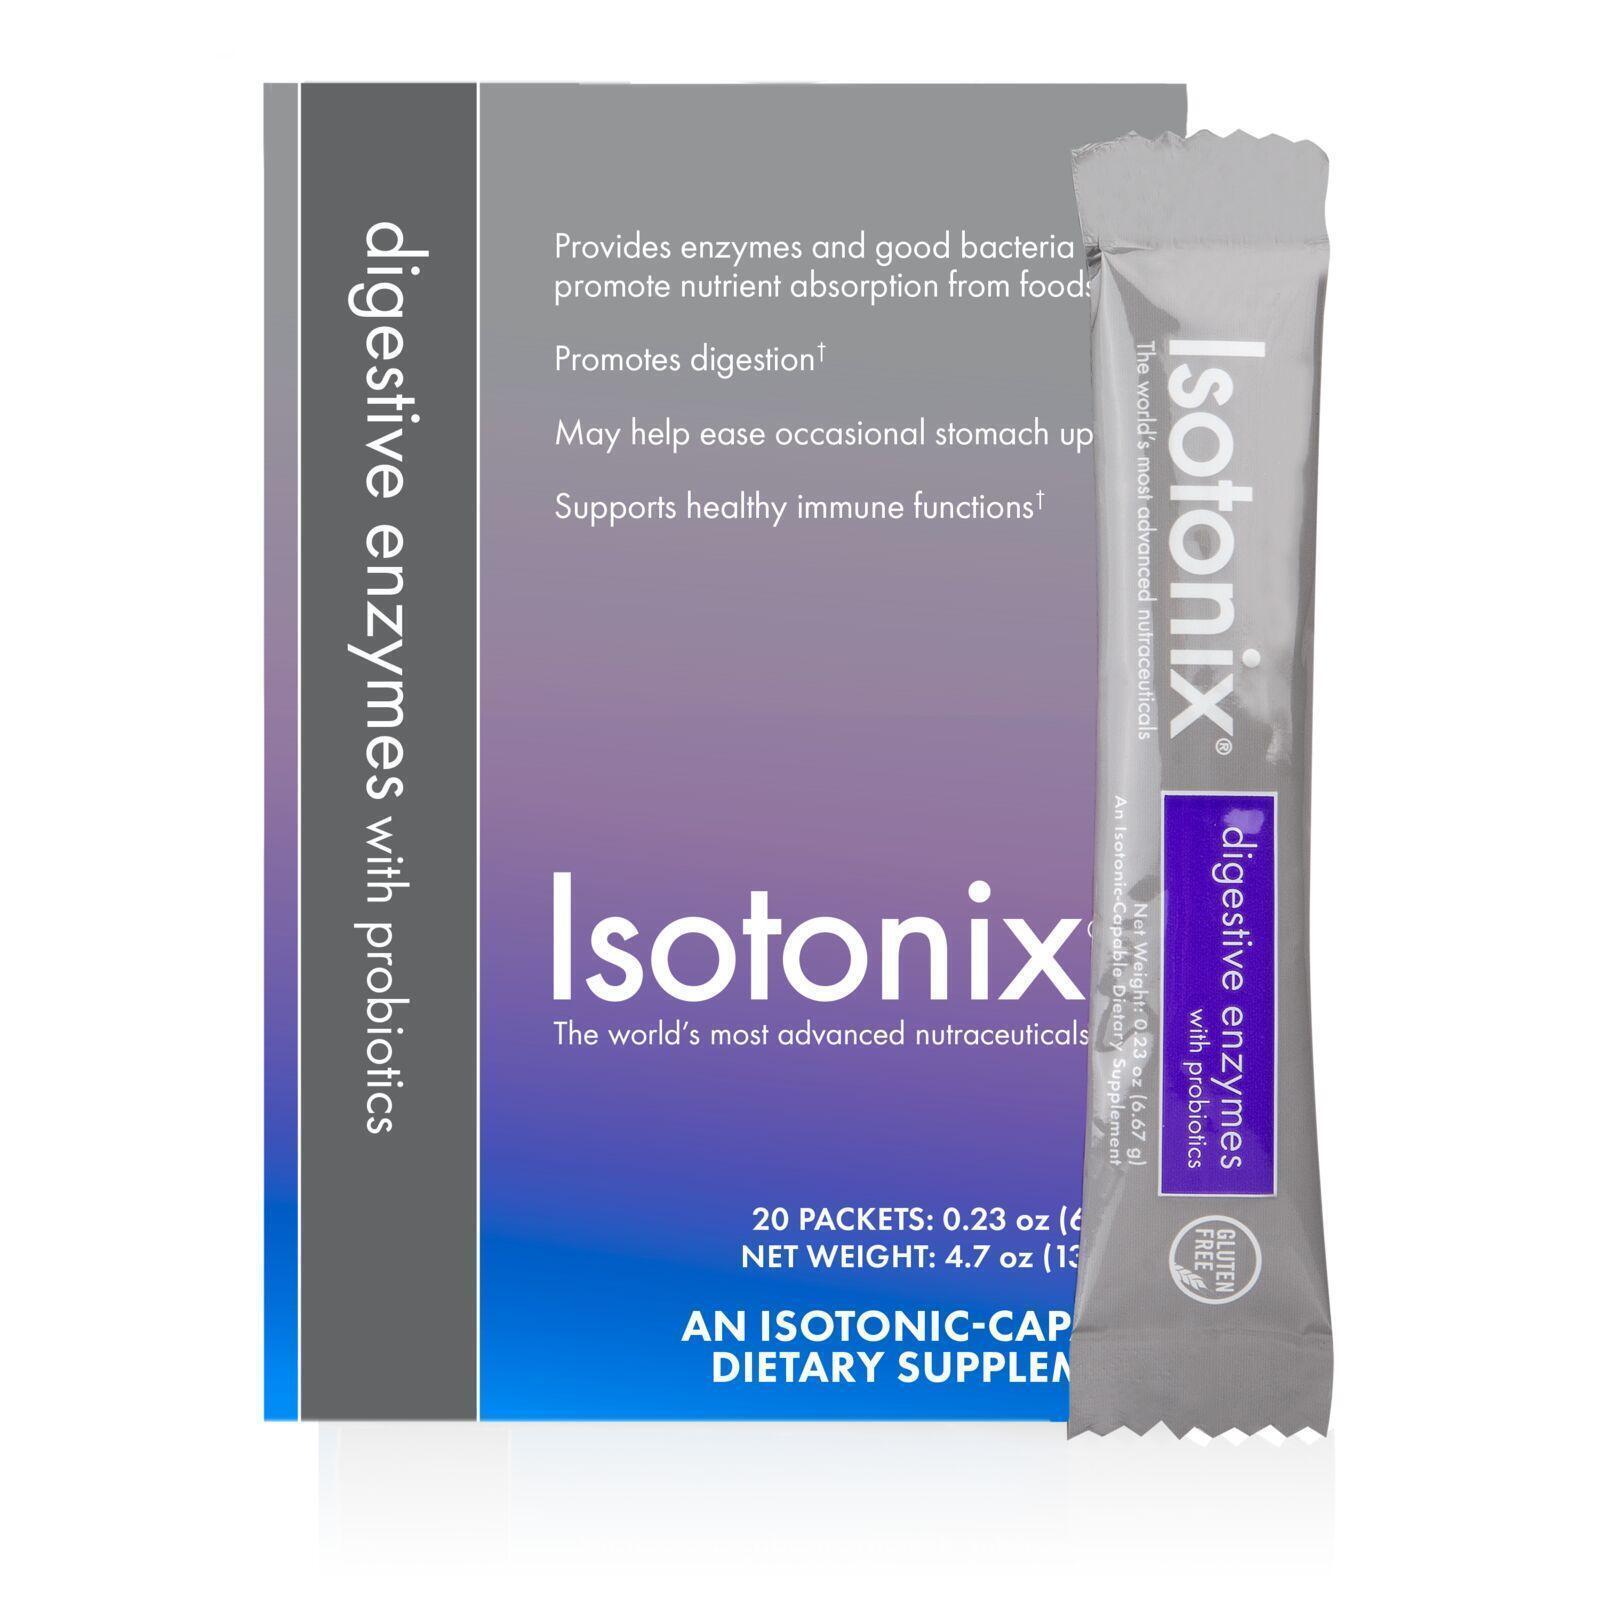 Isotonix Digestive Enzymes with Probiotics (Packets),Top 20 Customer Favorite, Product Tested NO Detectable GMO, Vegan